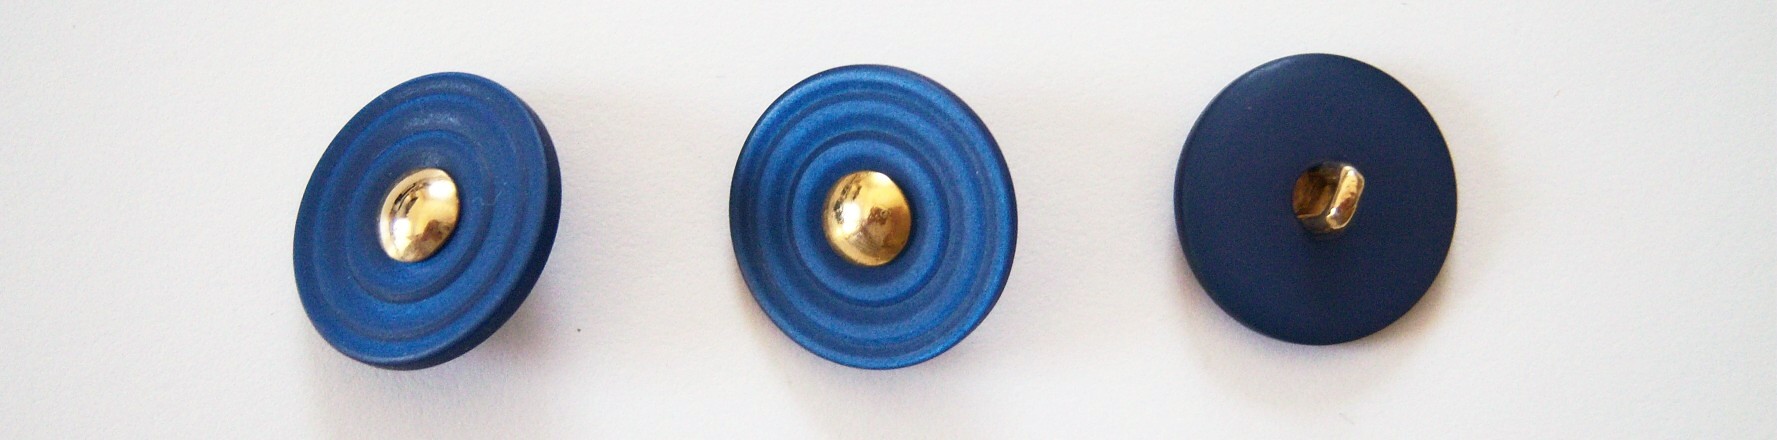 Royal Pearlized/Gold 7/8" Shank Button